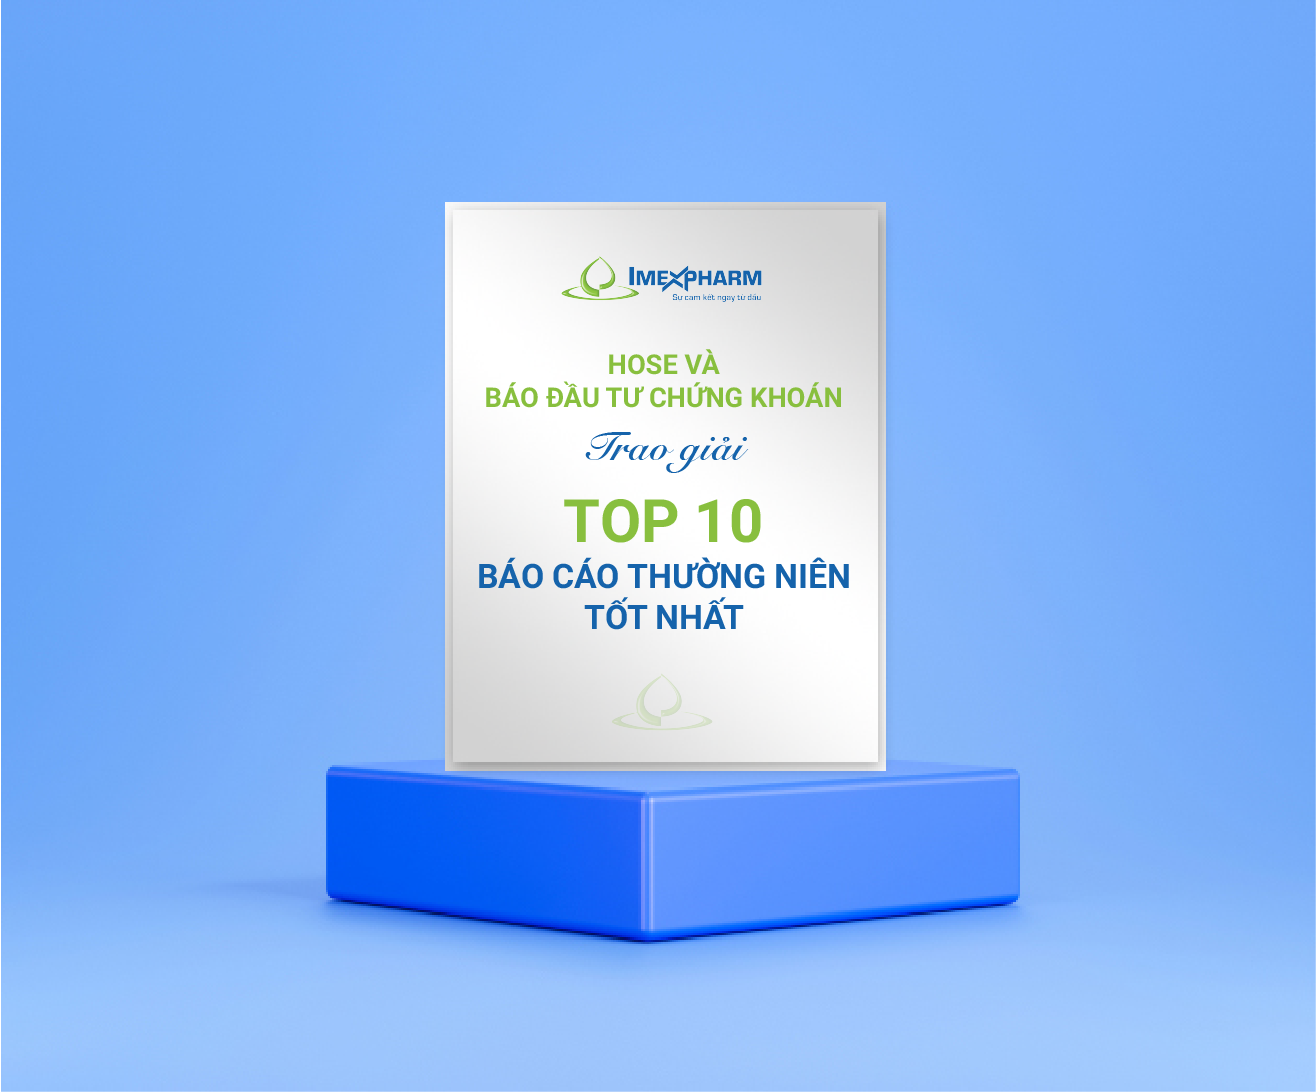 HOSE and Securities Investment Newspaper awarded Top 10 Best Annual Reports.